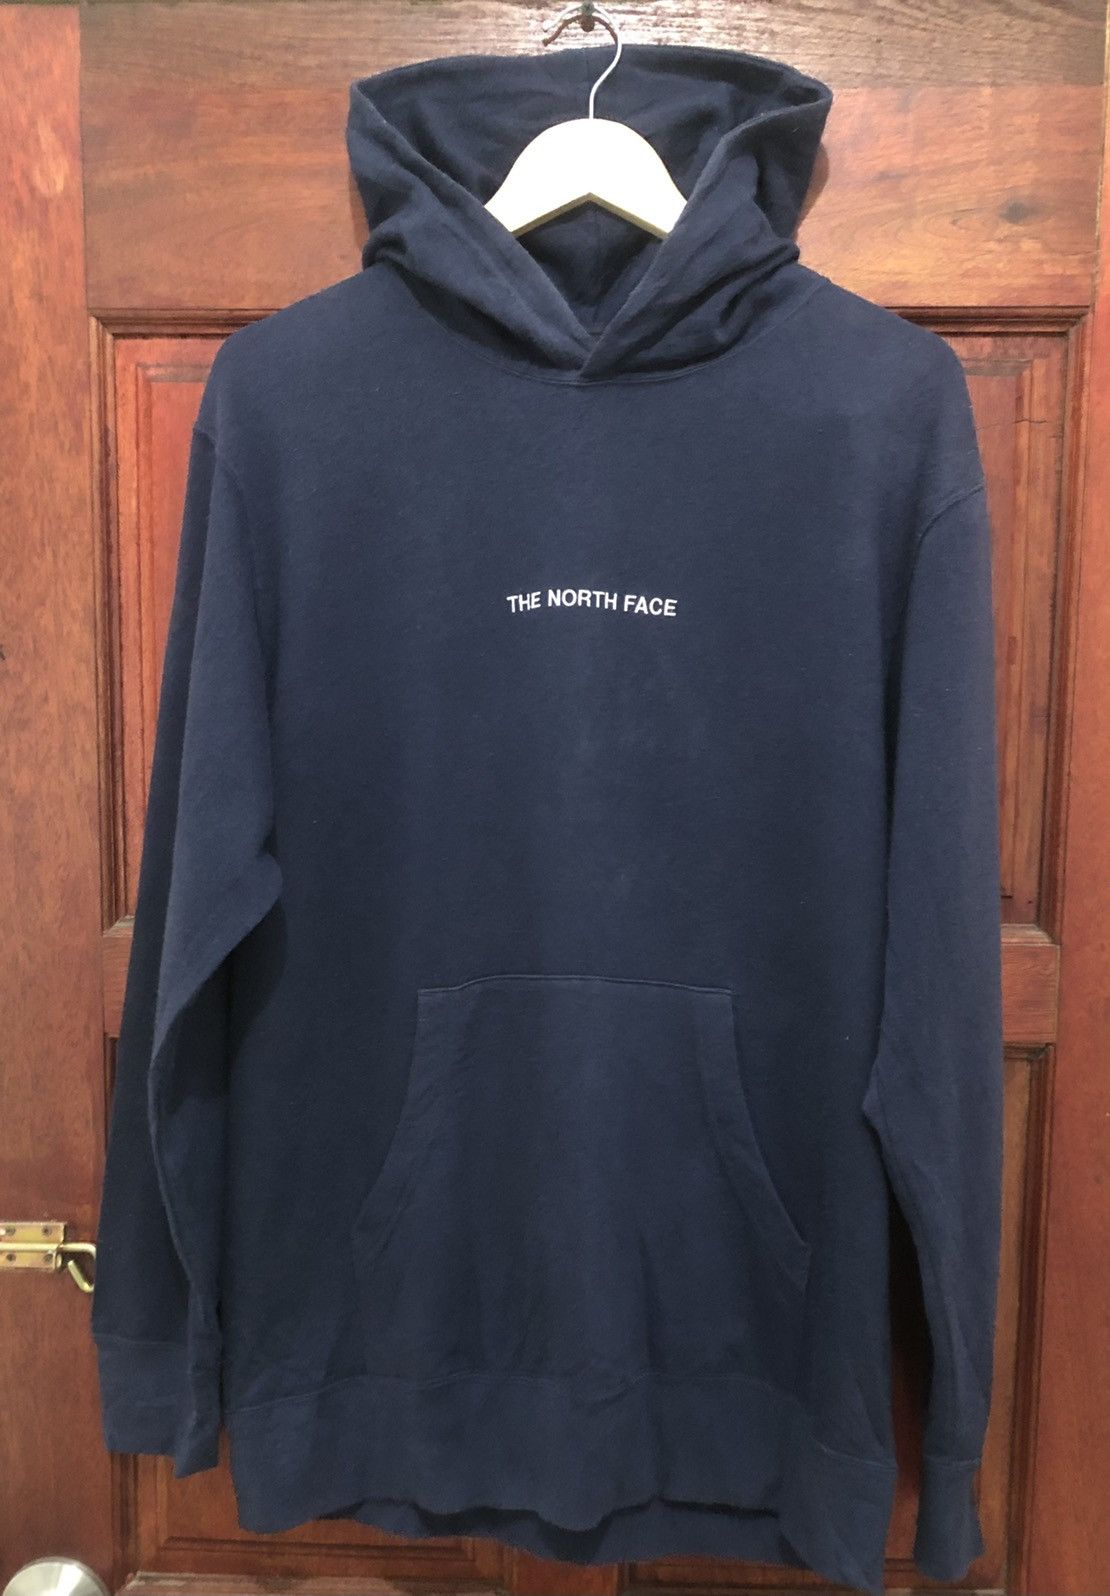 The North Face Pullover Hoodie Embroidery Crewneck - 1